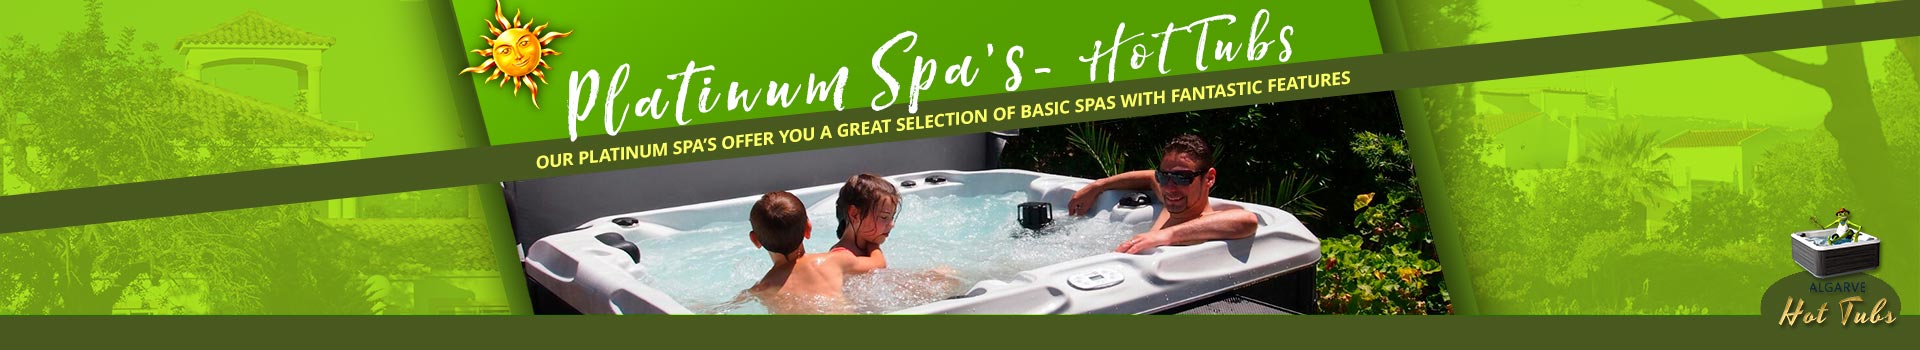 Platinum Spa's - Hottubs great selection of Spas with fantastic Features and modern Design